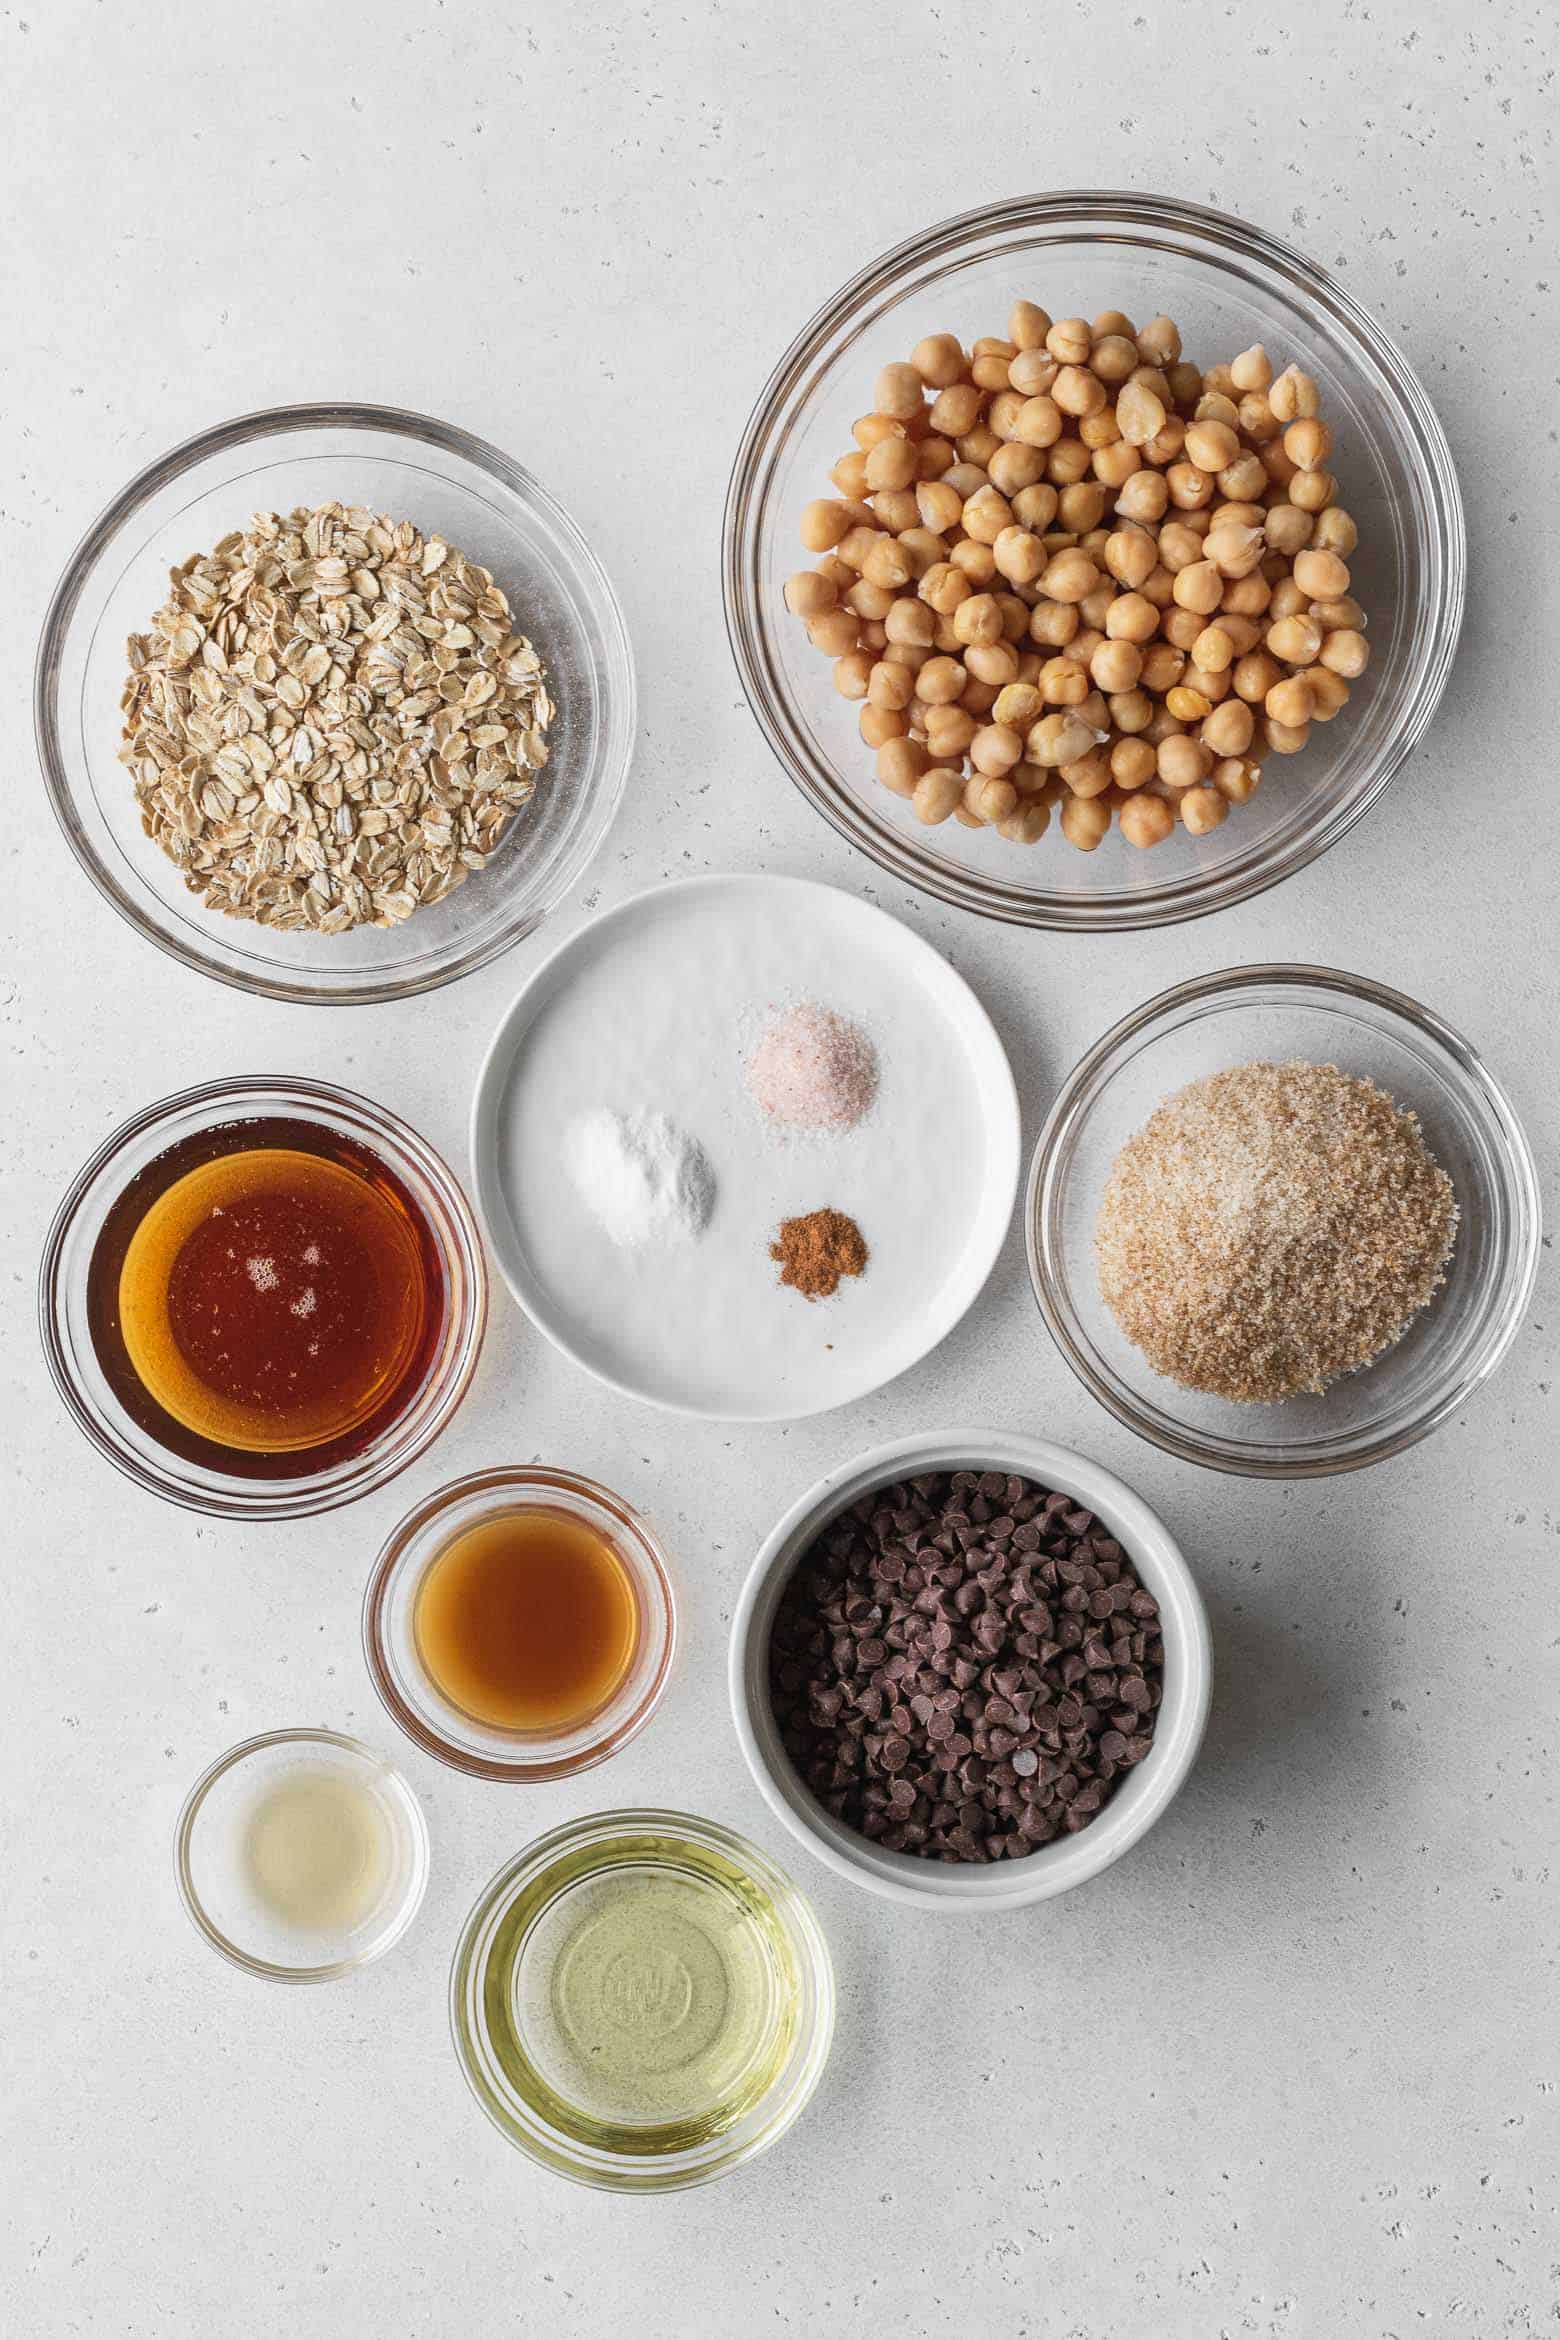 Ingredients for chocolate chip chickpea cookies